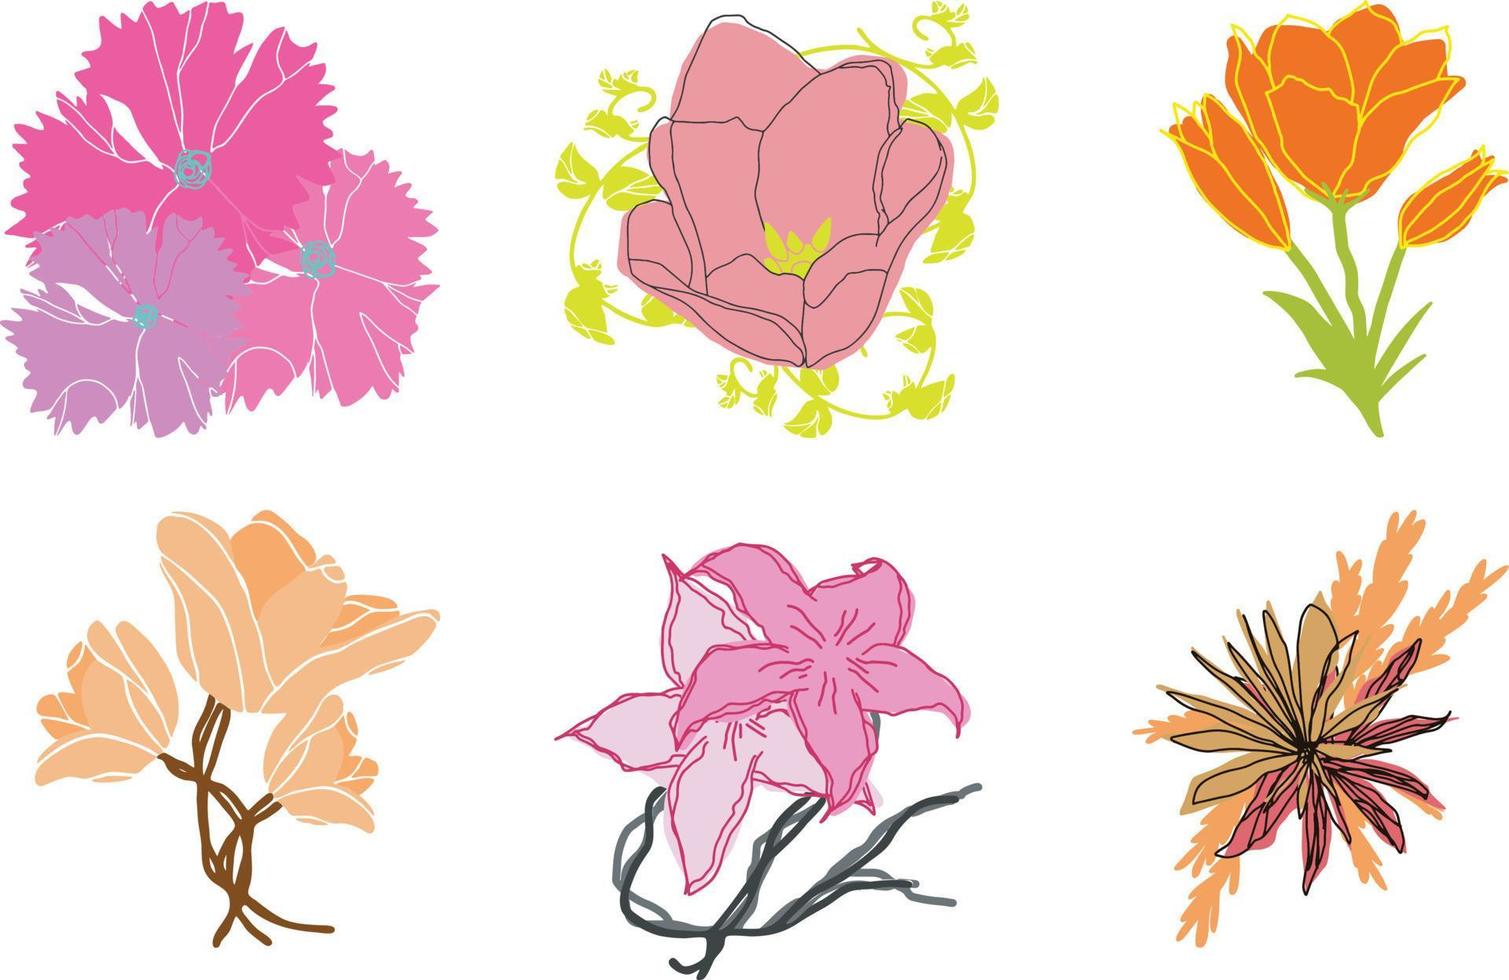 Vector line black illustration graphics flowers set peony, protea, tulip, iris with colors stains